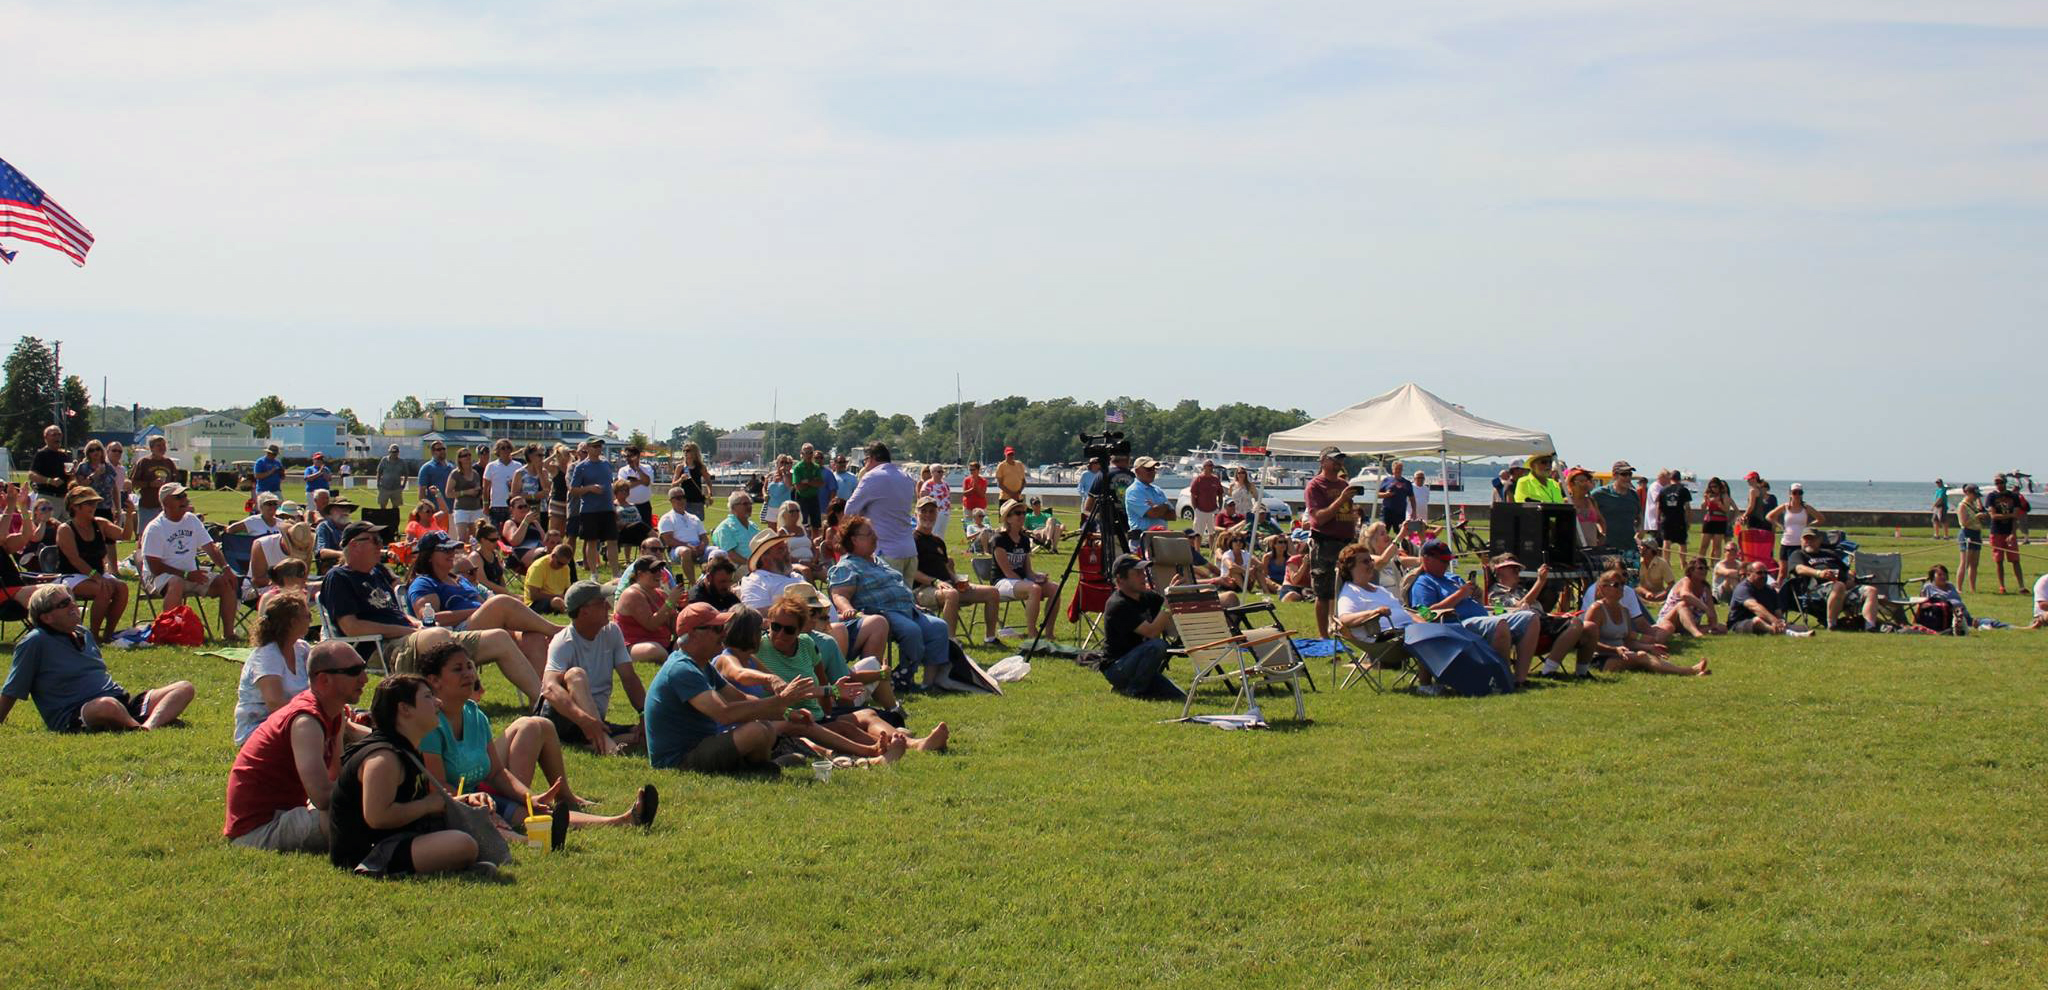 Crowd of the 2017 Music Festival, people standing and sitting listening to music on the lawn.